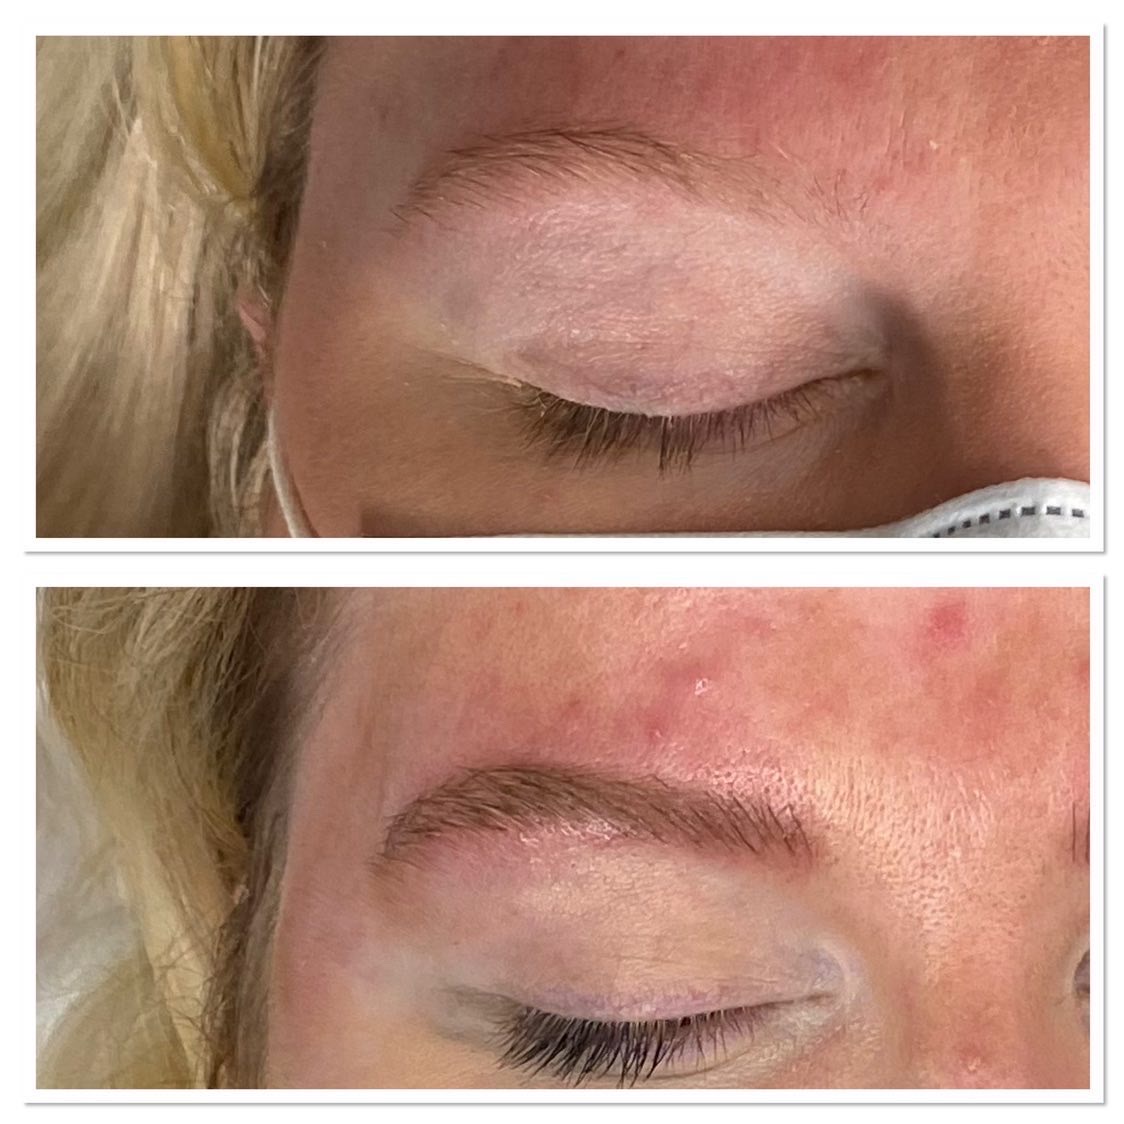 SEMI PERMANENT MAKE UP BROWS BEFORE AND AFTER